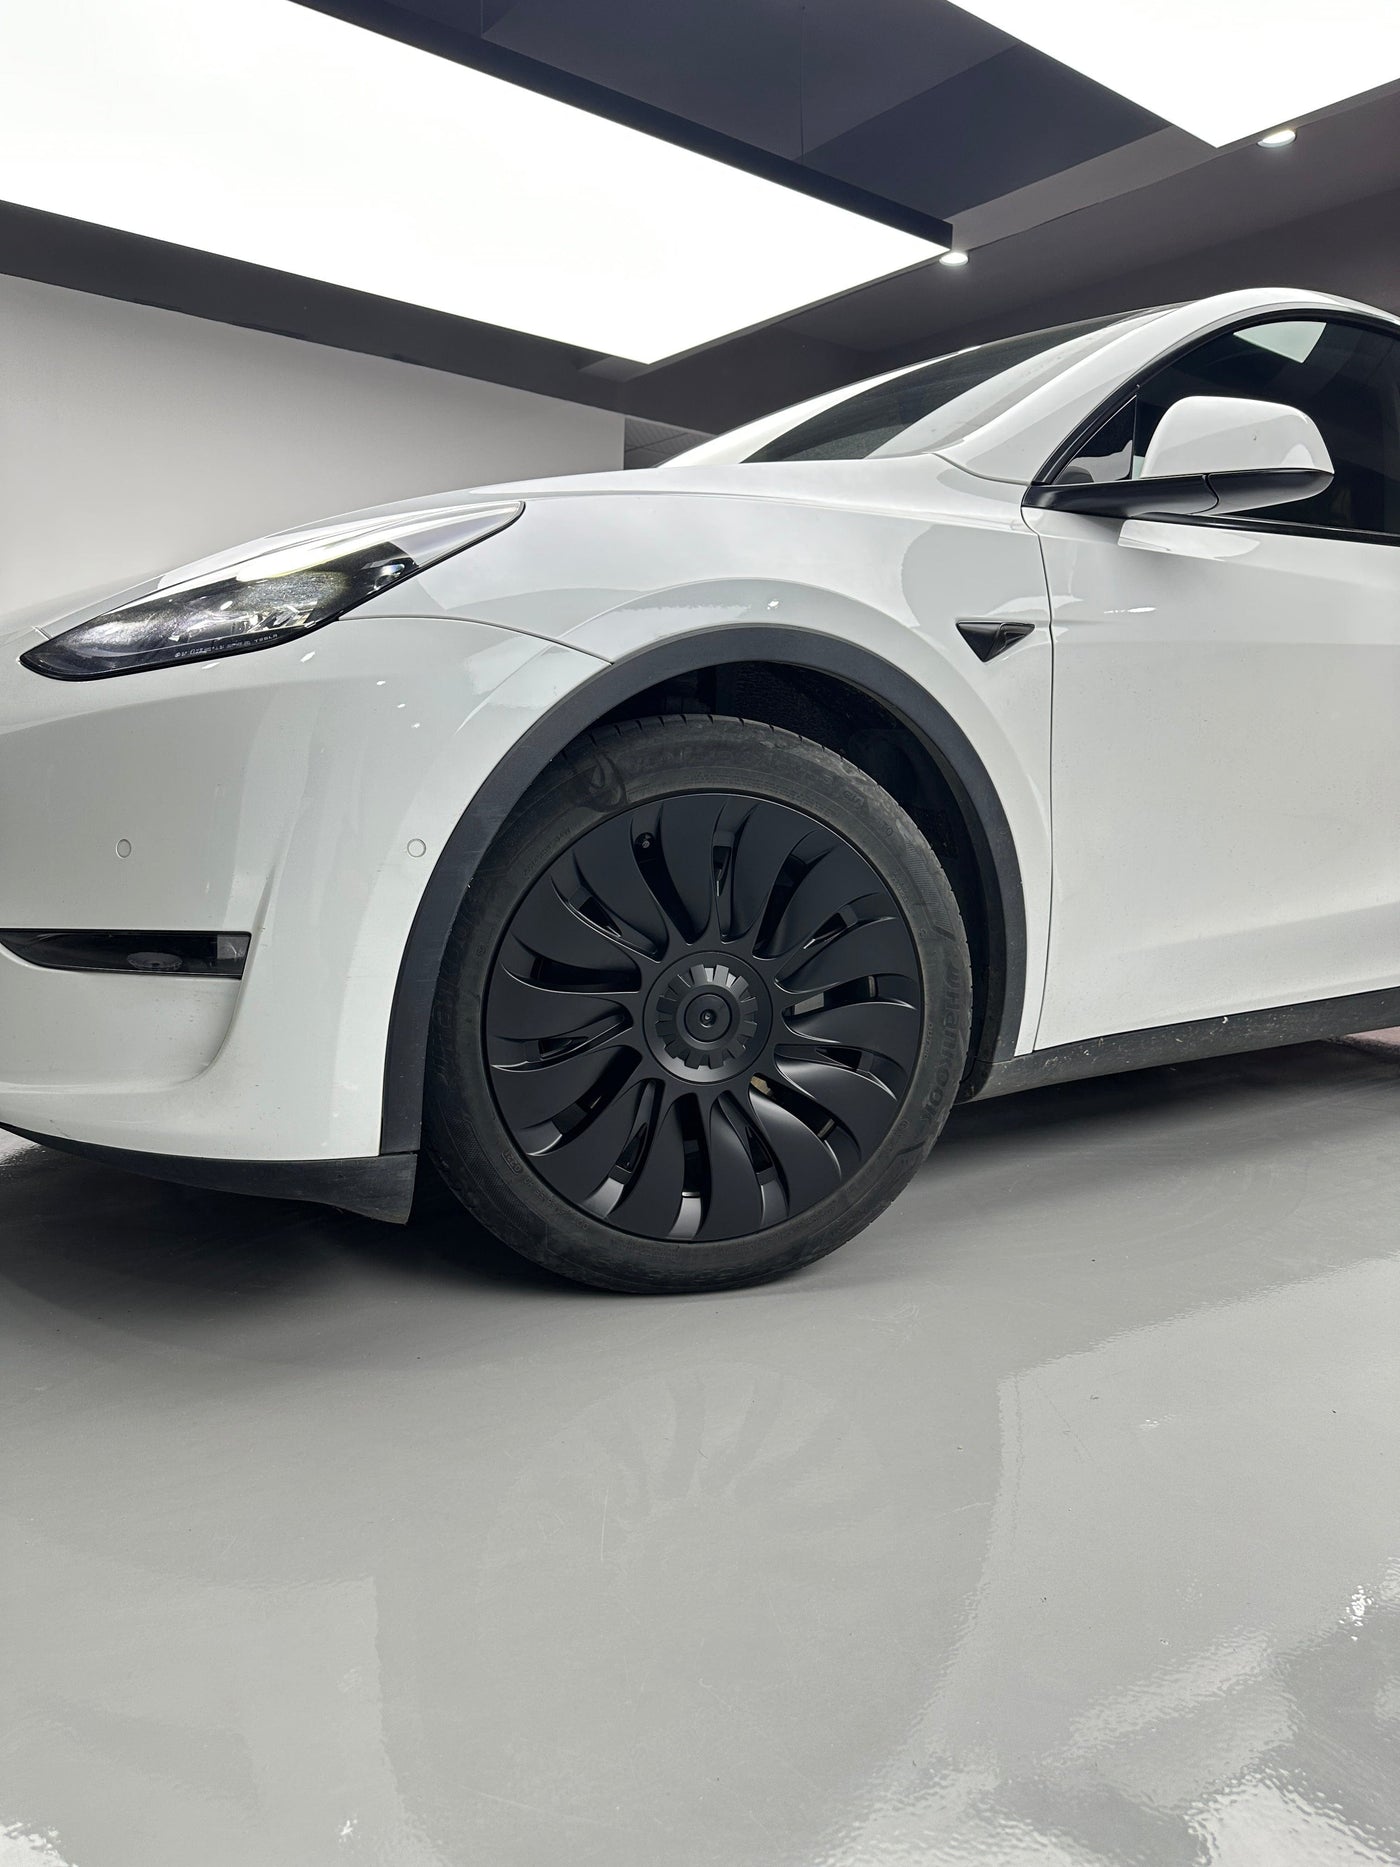 4PCS 19inch Hurricane Whirlwind Performance Full Coverage Wheel Covers For Tesla Model Y 2020-2023 - PimpMyEV